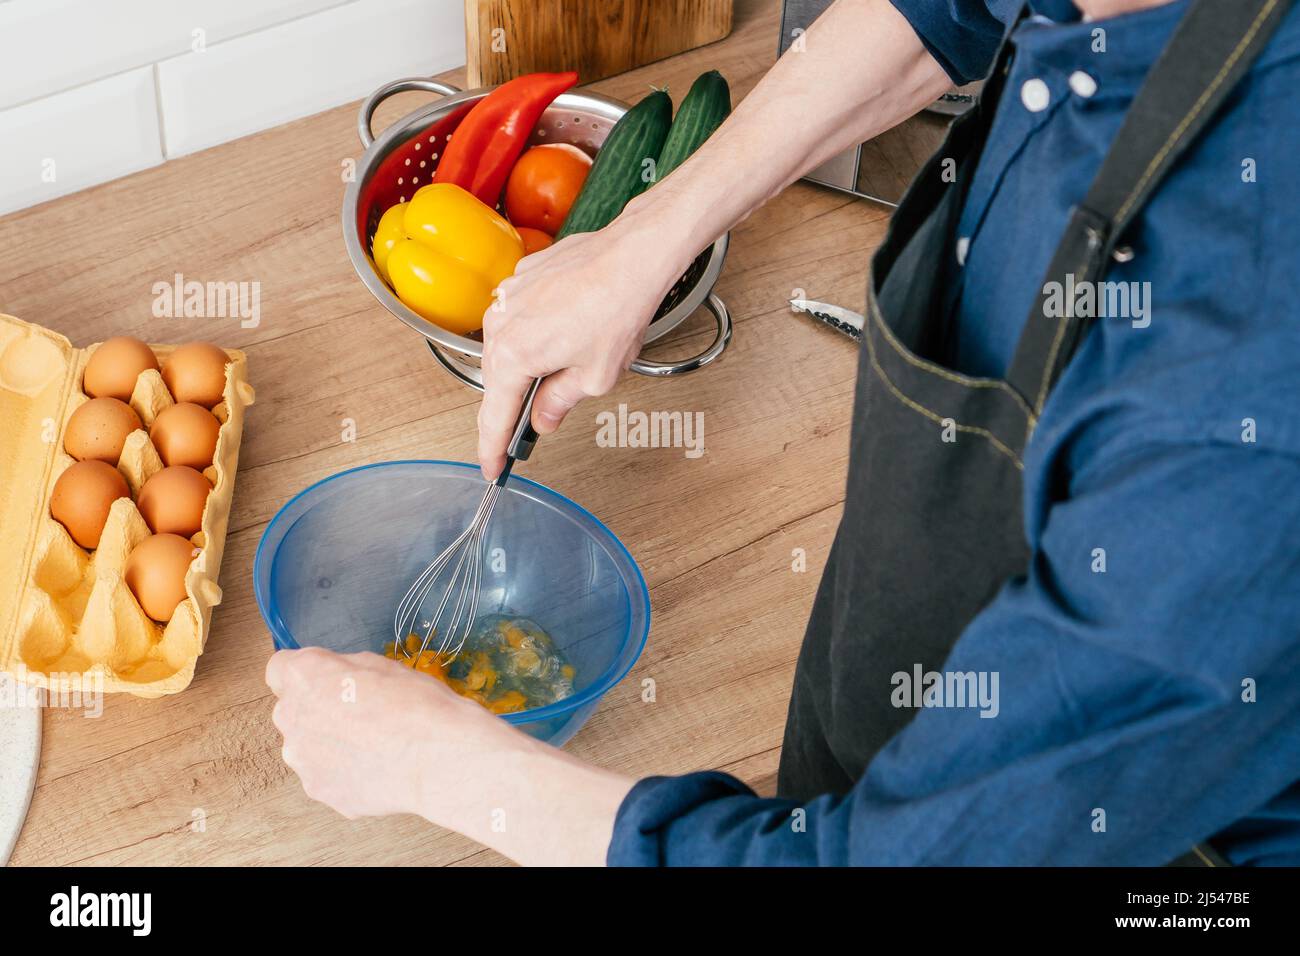 https://c8.alamy.com/comp/2J547BE/top-view-of-unrecognizable-man-in-blue-long-sleeve-shirt-beating-eggs-in-blue-plastic-bowl-with-wire-whisk-on-table-near-steel-colander-with-red-yell-2J547BE.jpg